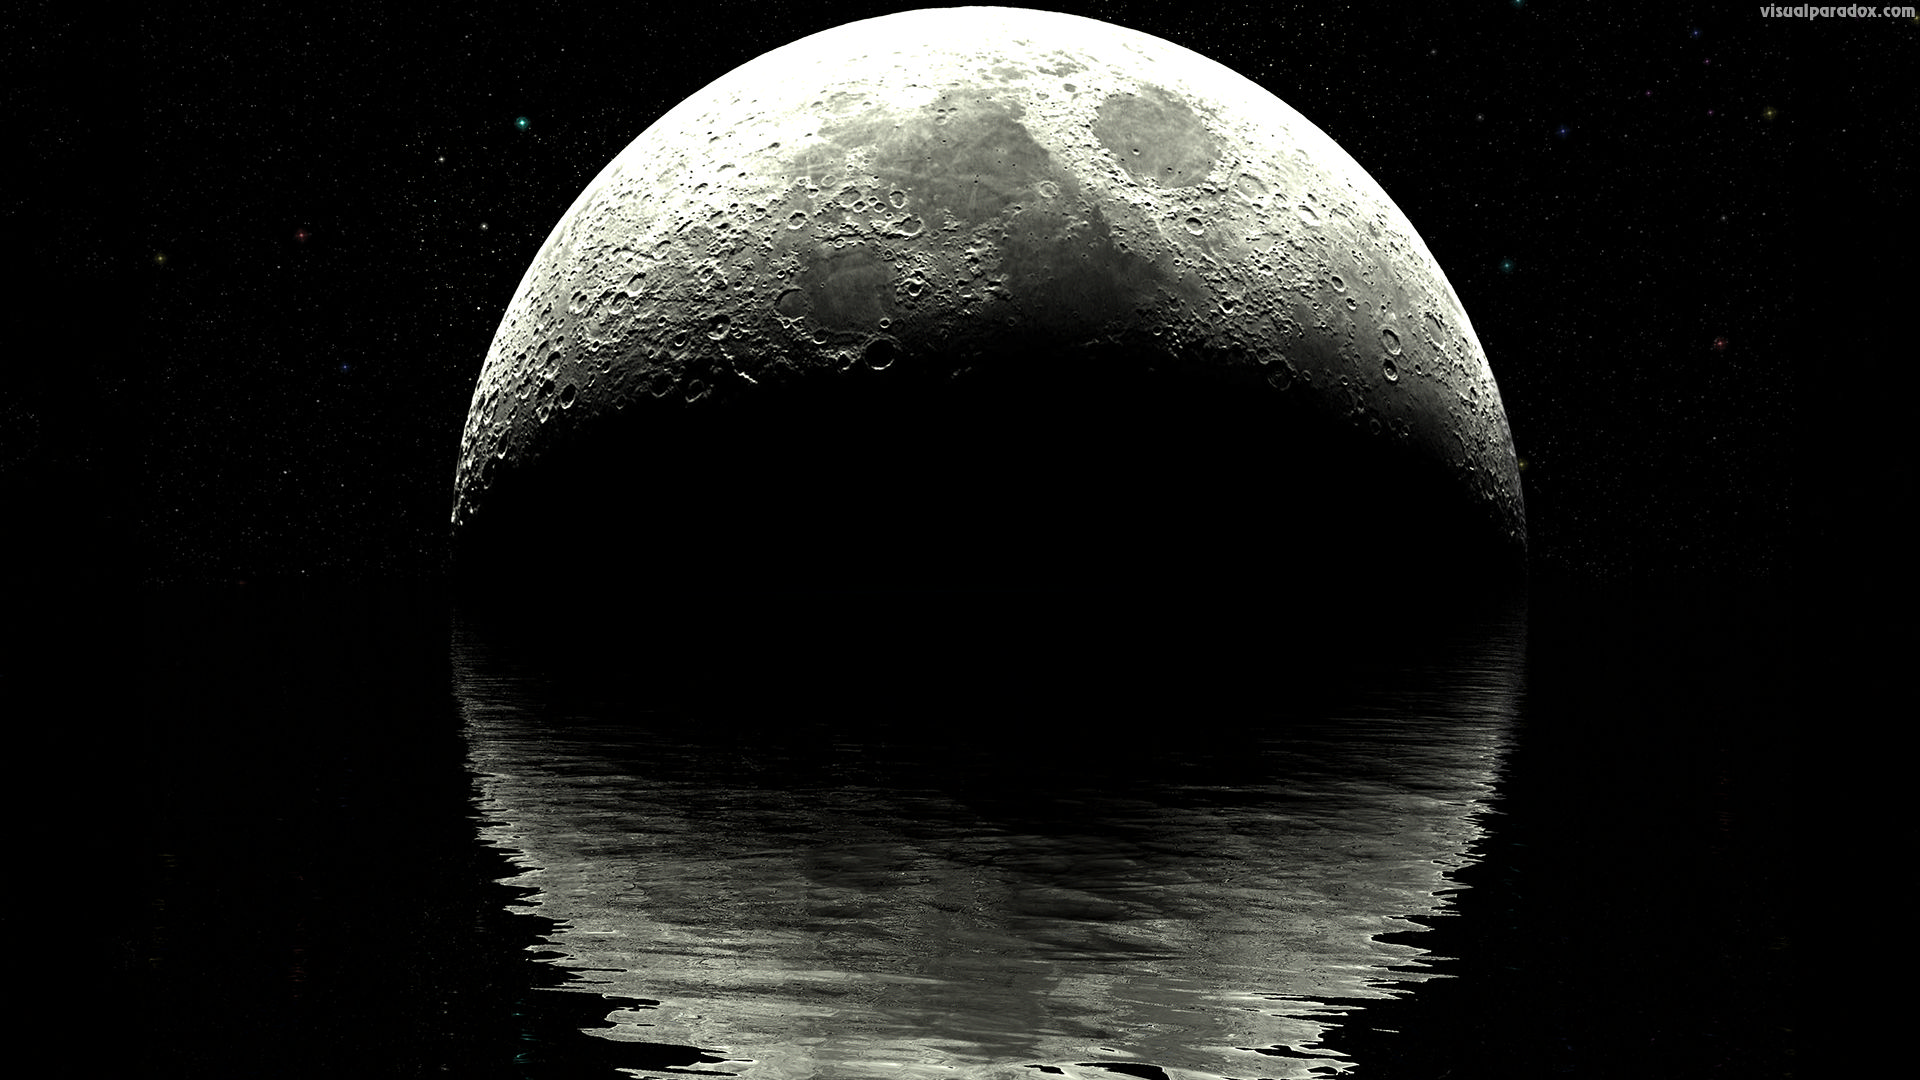 moon, lunar, ocean, water, waves, ripples, night, stars, planet, reflection, planets, black, white, sea, craters, 3d, wallpaper